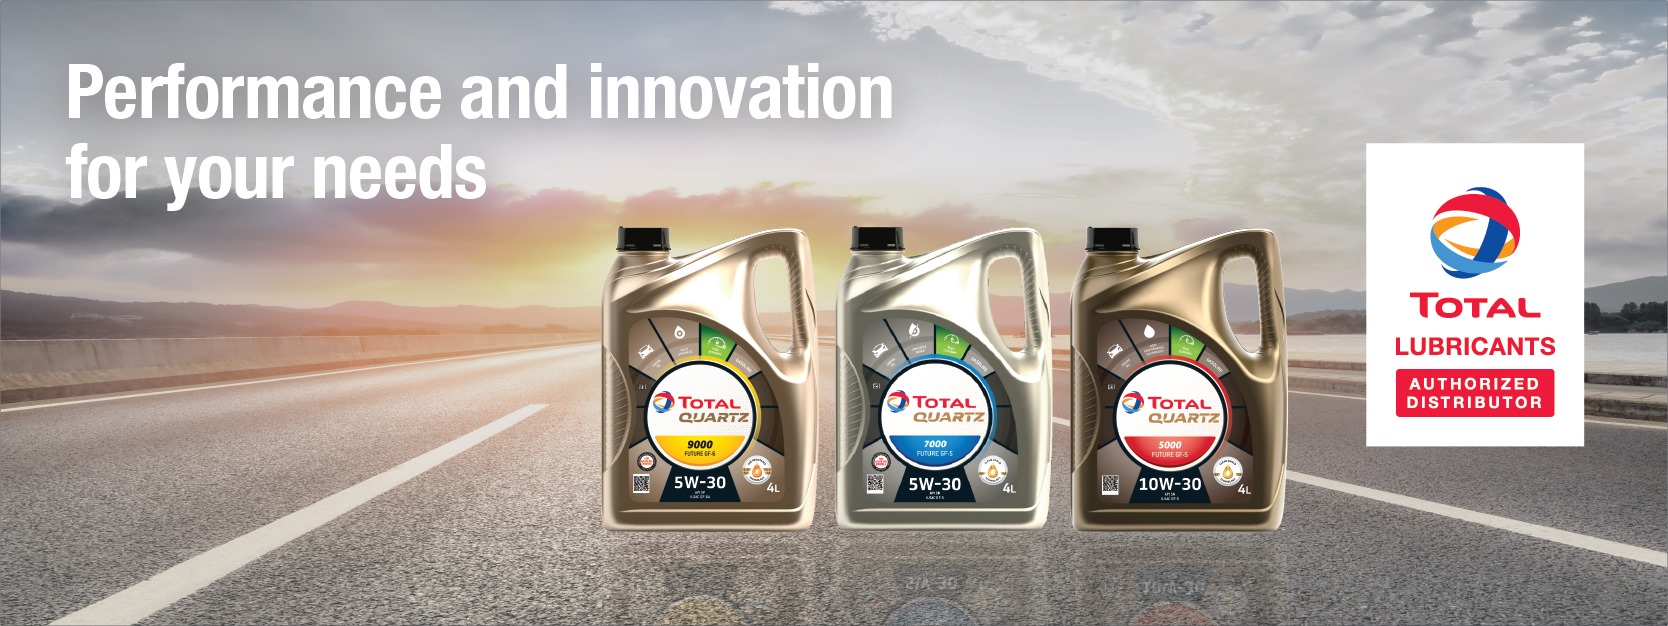 total lubricants